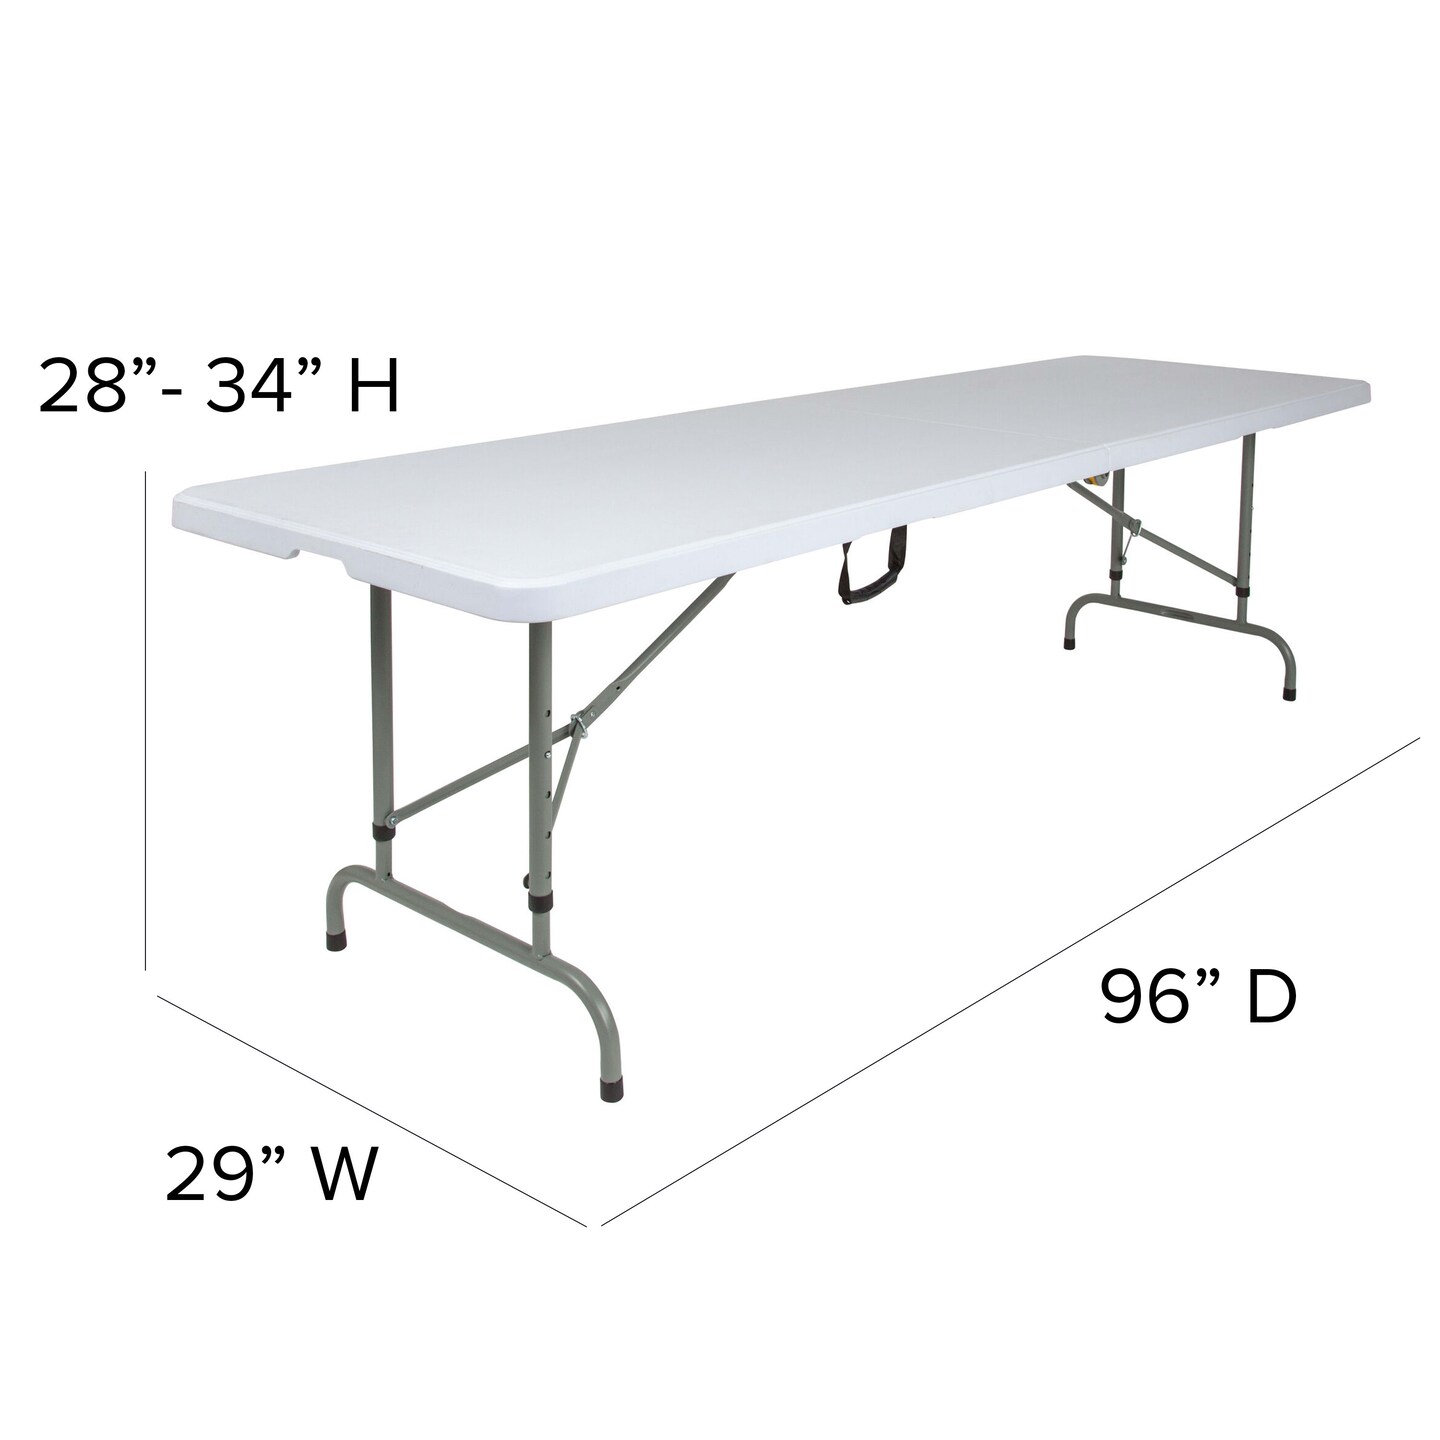 Emma and Oliver 8-Foot Height Adjustable Bi-Fold Plastic Banquet and Event Folding Table with Carrying Handle